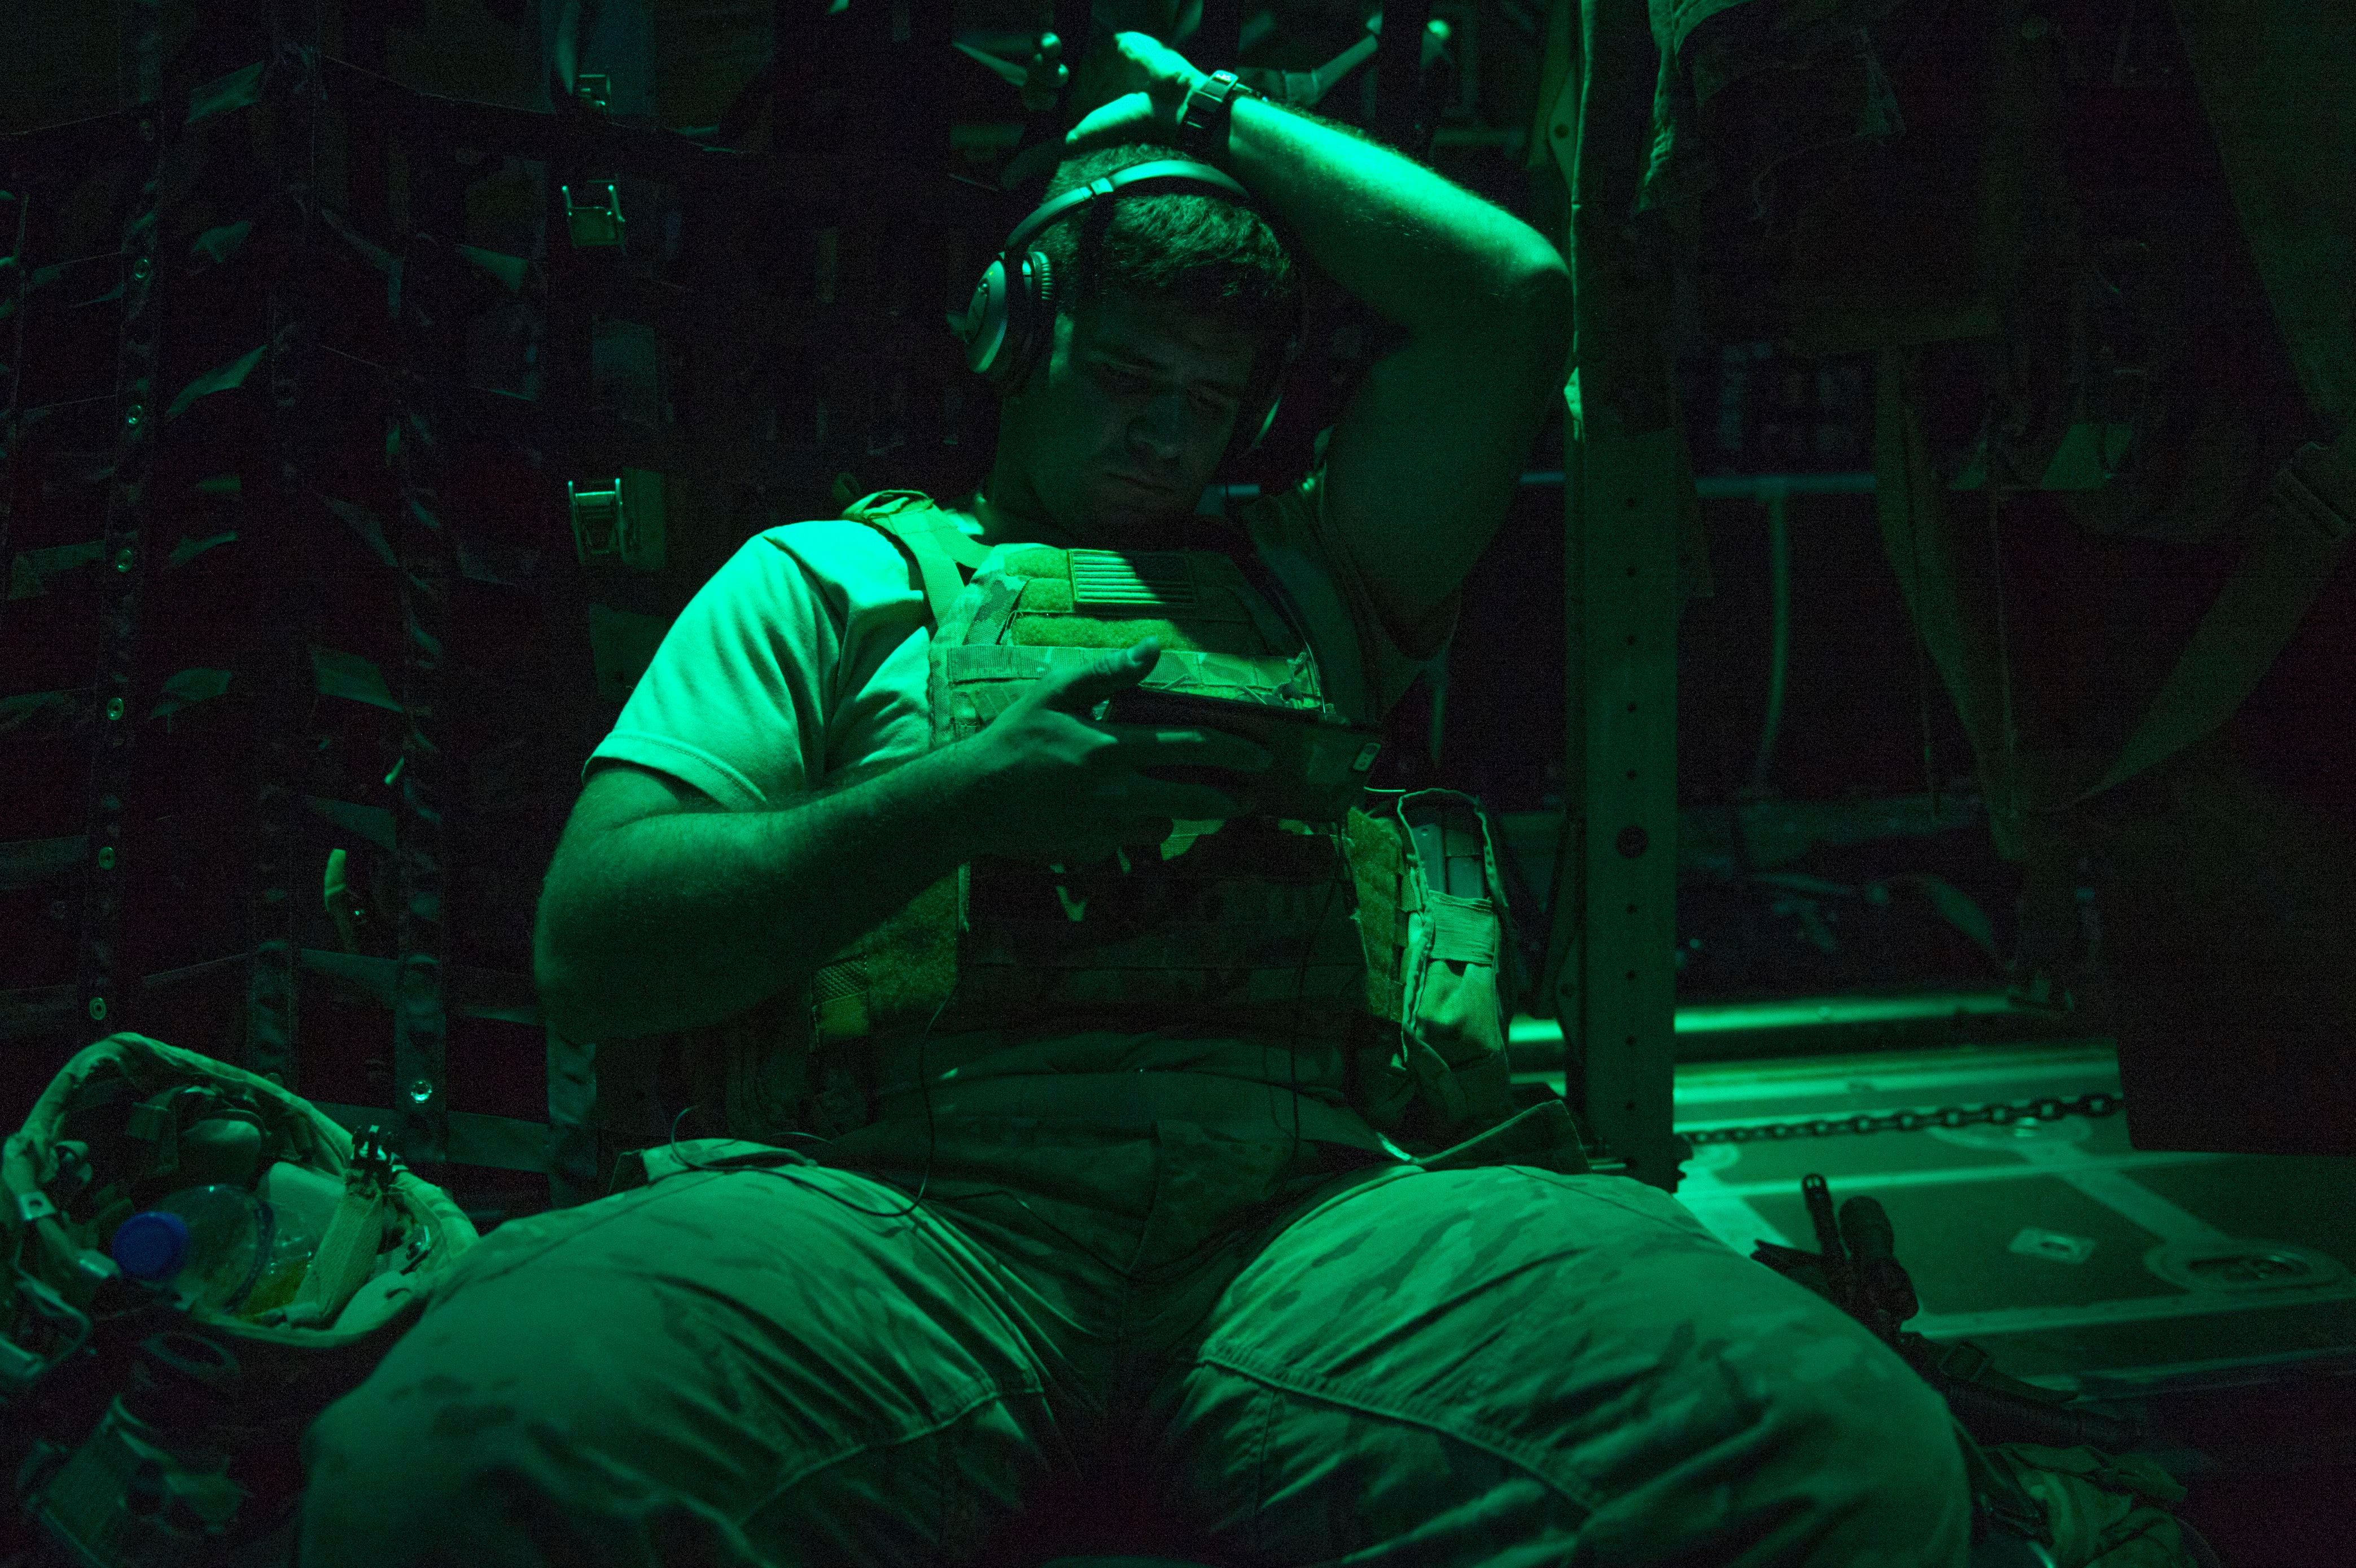 A soldier watches a movie on a personal electronic device on board a U.S. Air Force C-130J Hercules during an air drop in Africa, Dec. 23, 2016. (Tech. Sgt. Joshua J. Garcia/Air Force)